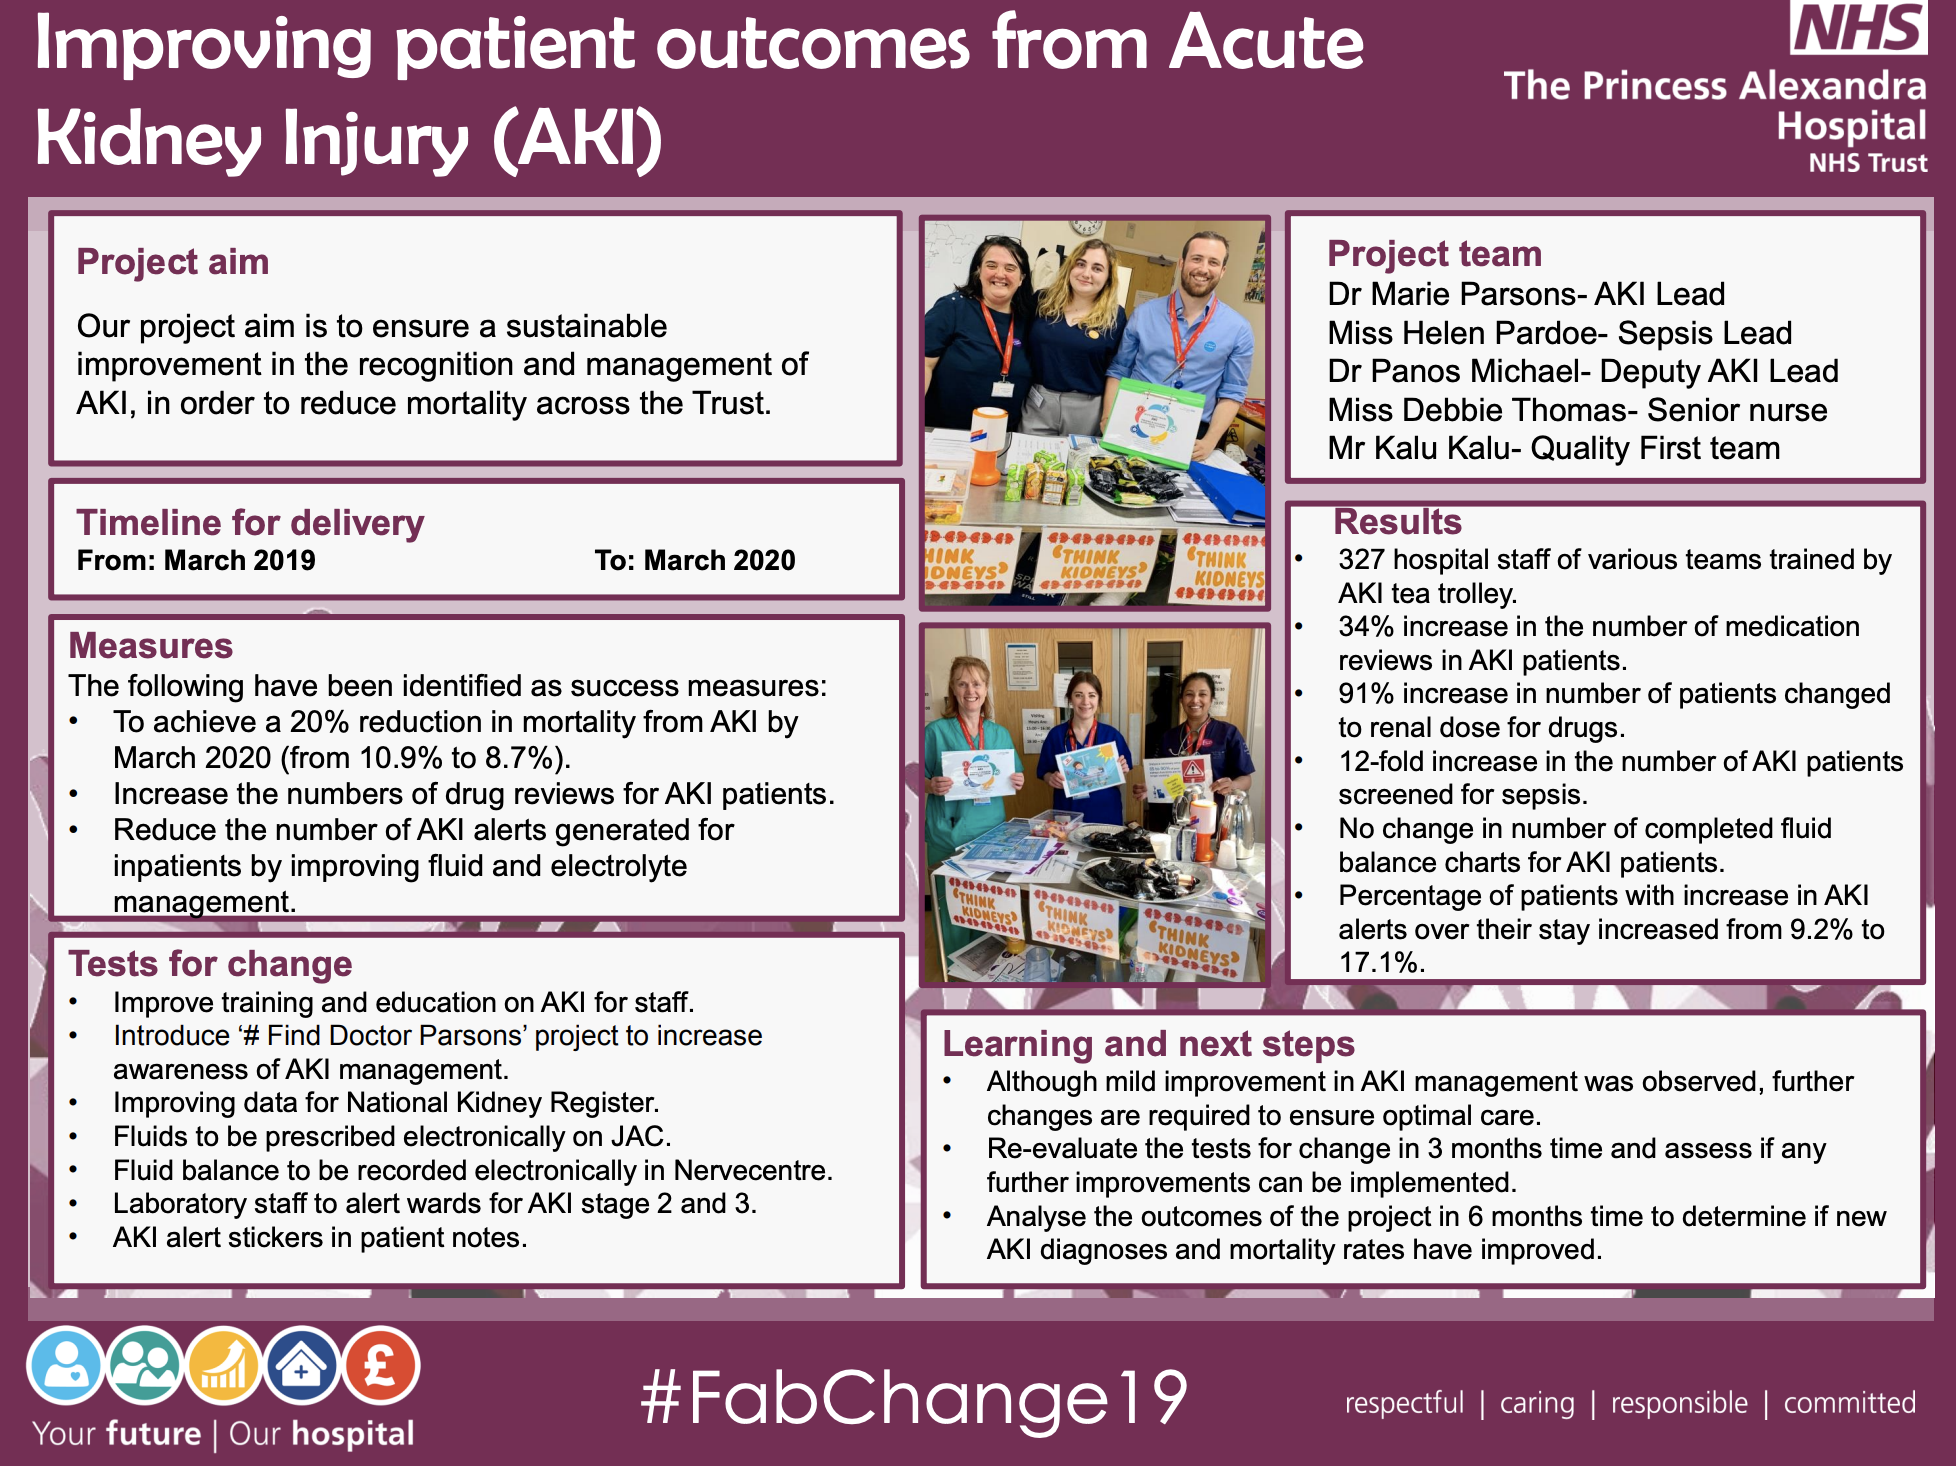 PAHT - Improving Patient Outcomes from Acute Kidney Injury - @QualityFirstPAH featured image